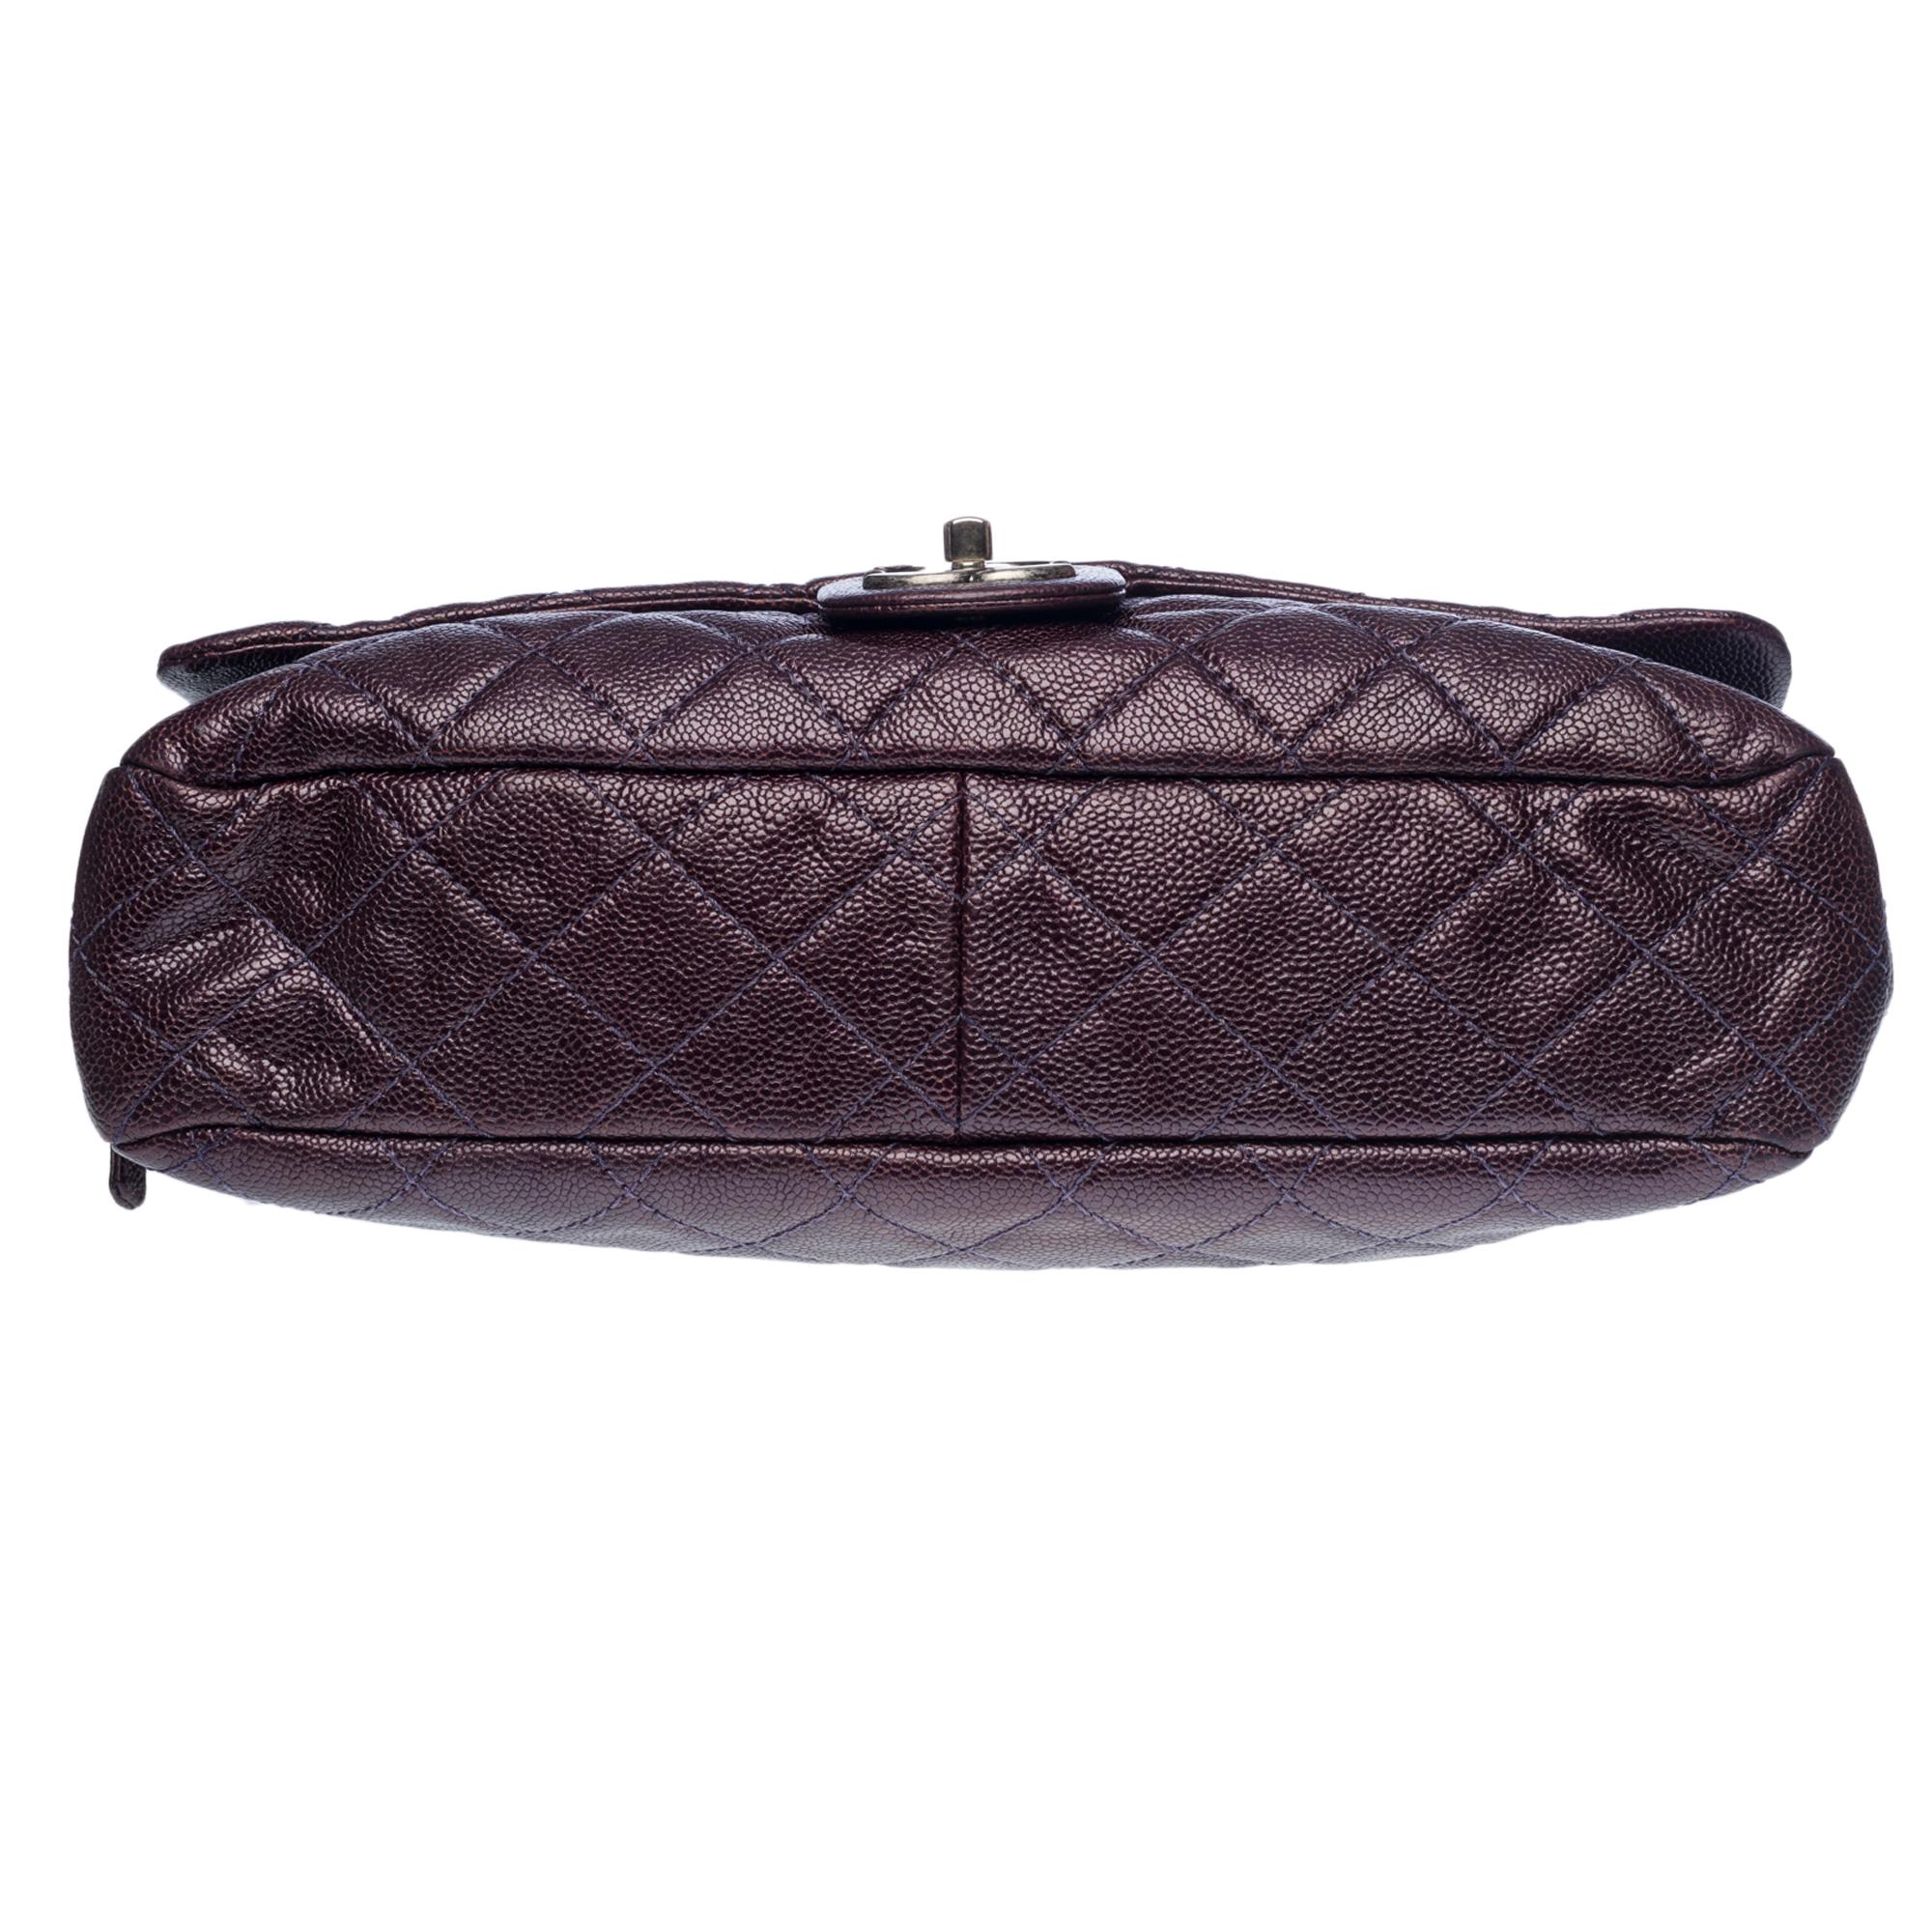 Stunning Chanel Classic shoulder flap bag in purple caviar leather, SHW 4